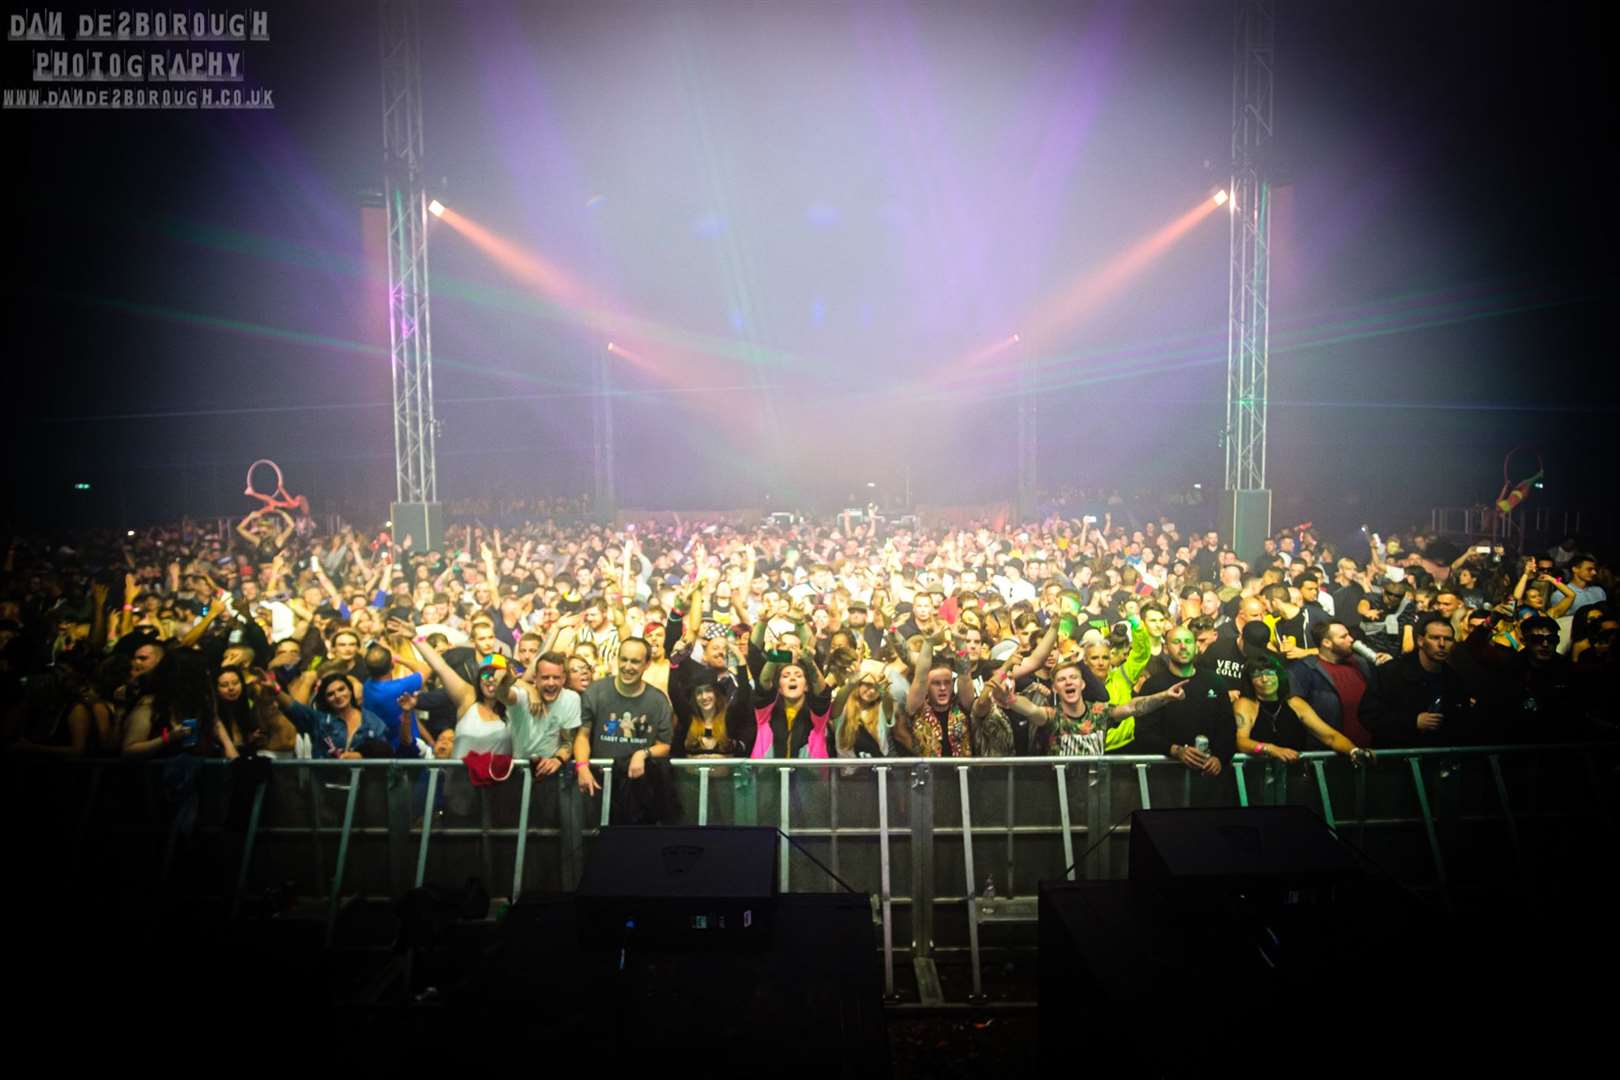 Thousands of people attended the festival in 2019. Picture: Dan Desborough